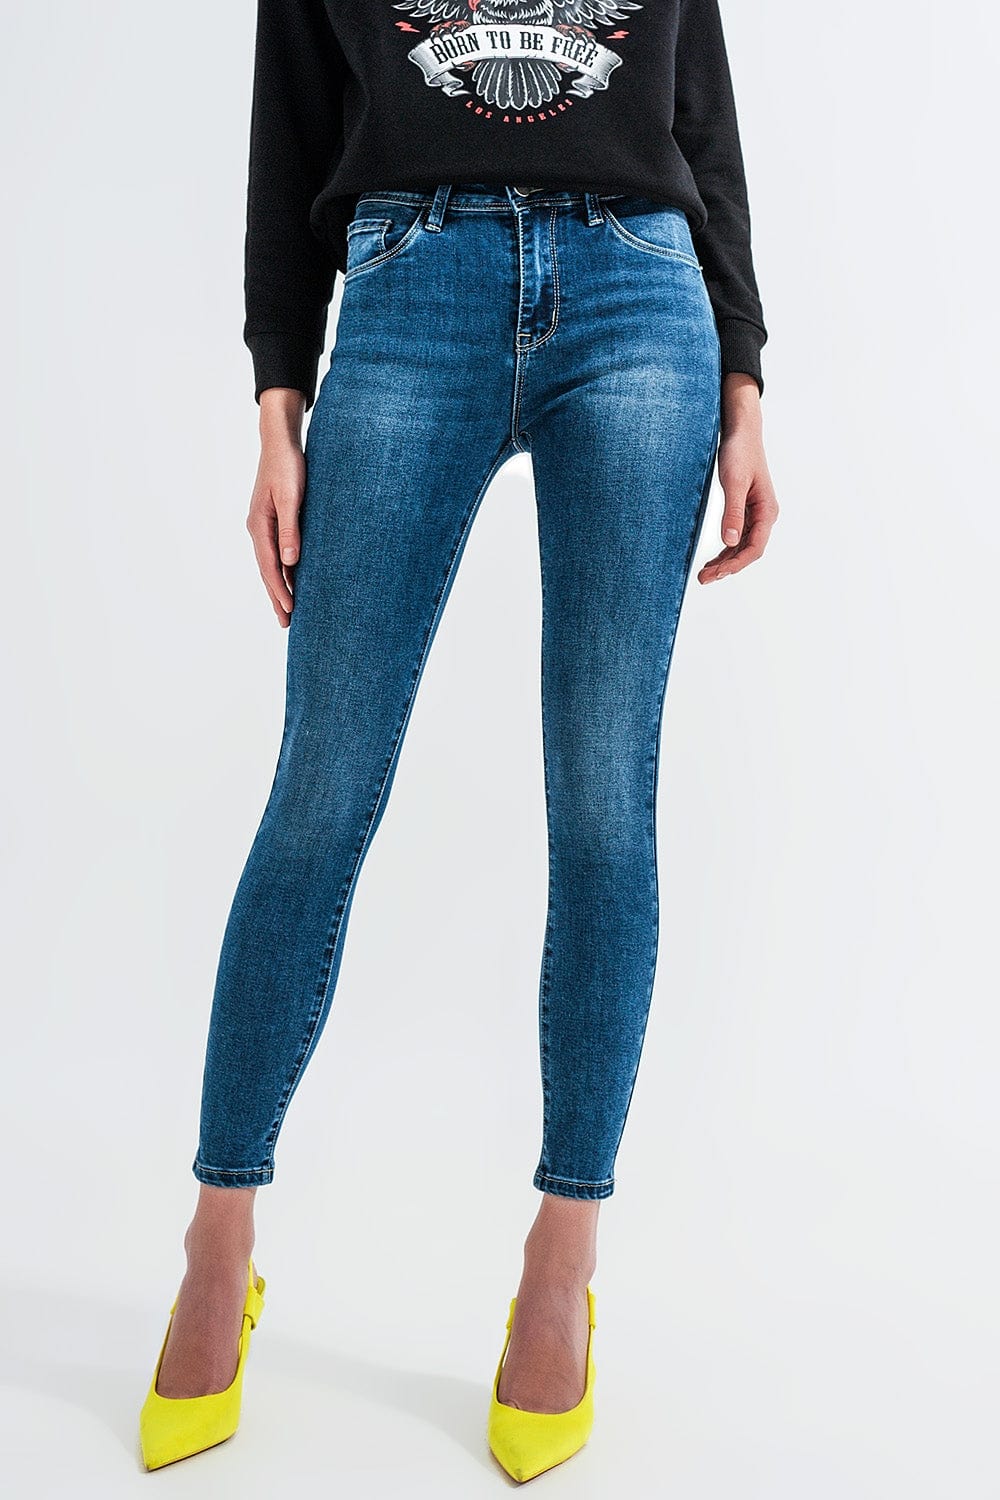 Q2 Jeans High waisted skinny jeans in mid blue